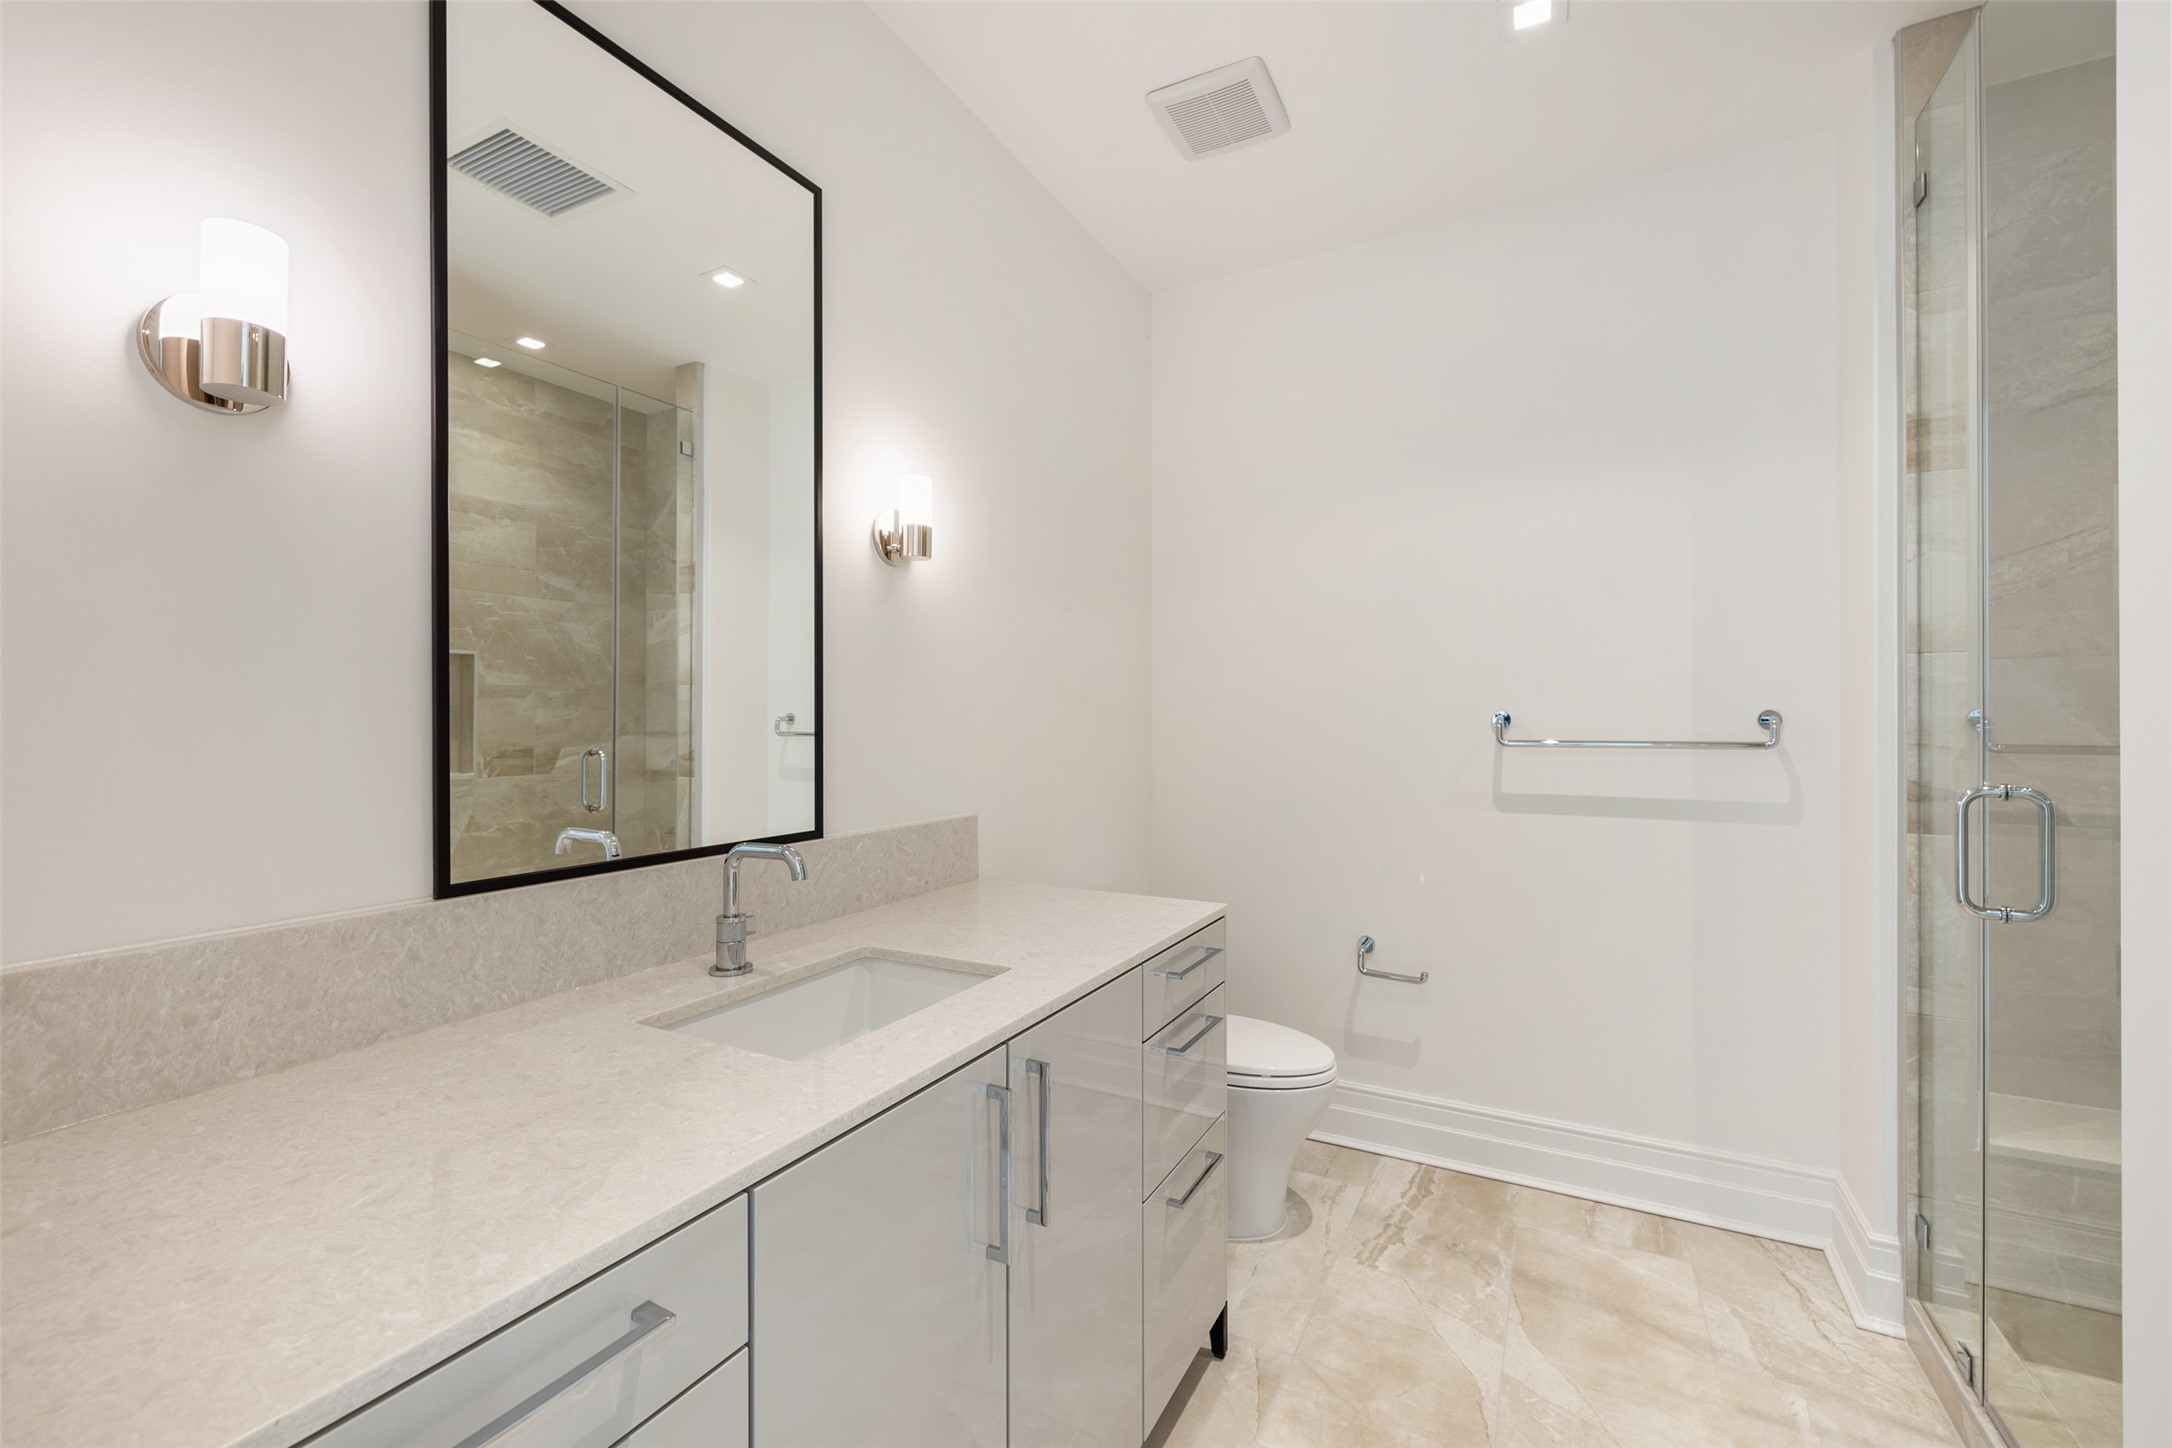 This Secondary Bathroom features high-end fixtures and a walk-in shower.